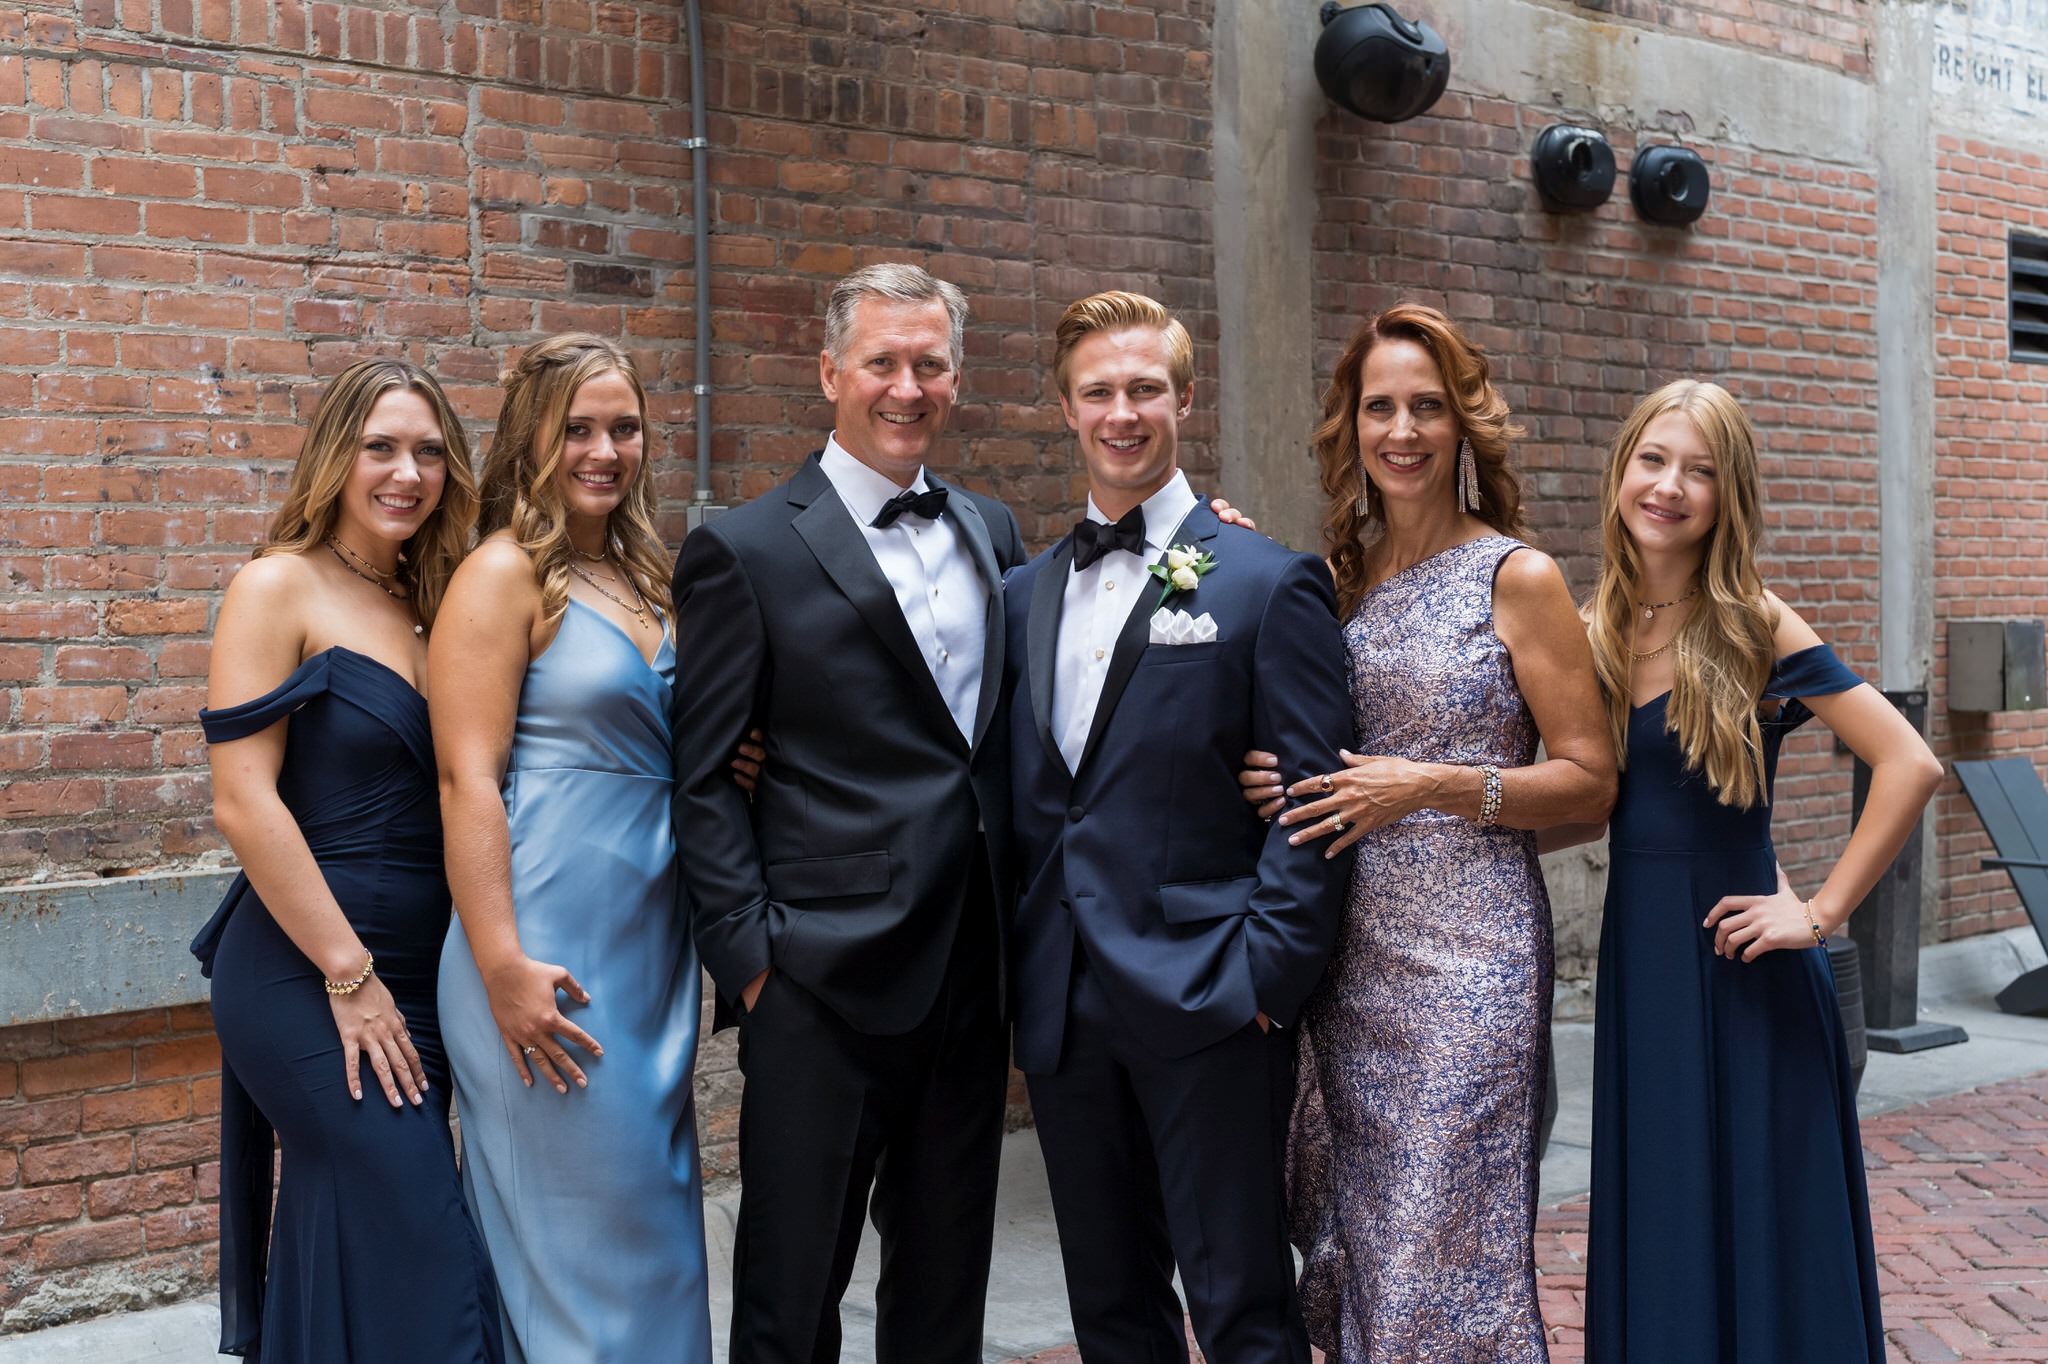 A family photo taken on a wedding day in Parker's Alley Detroit.  